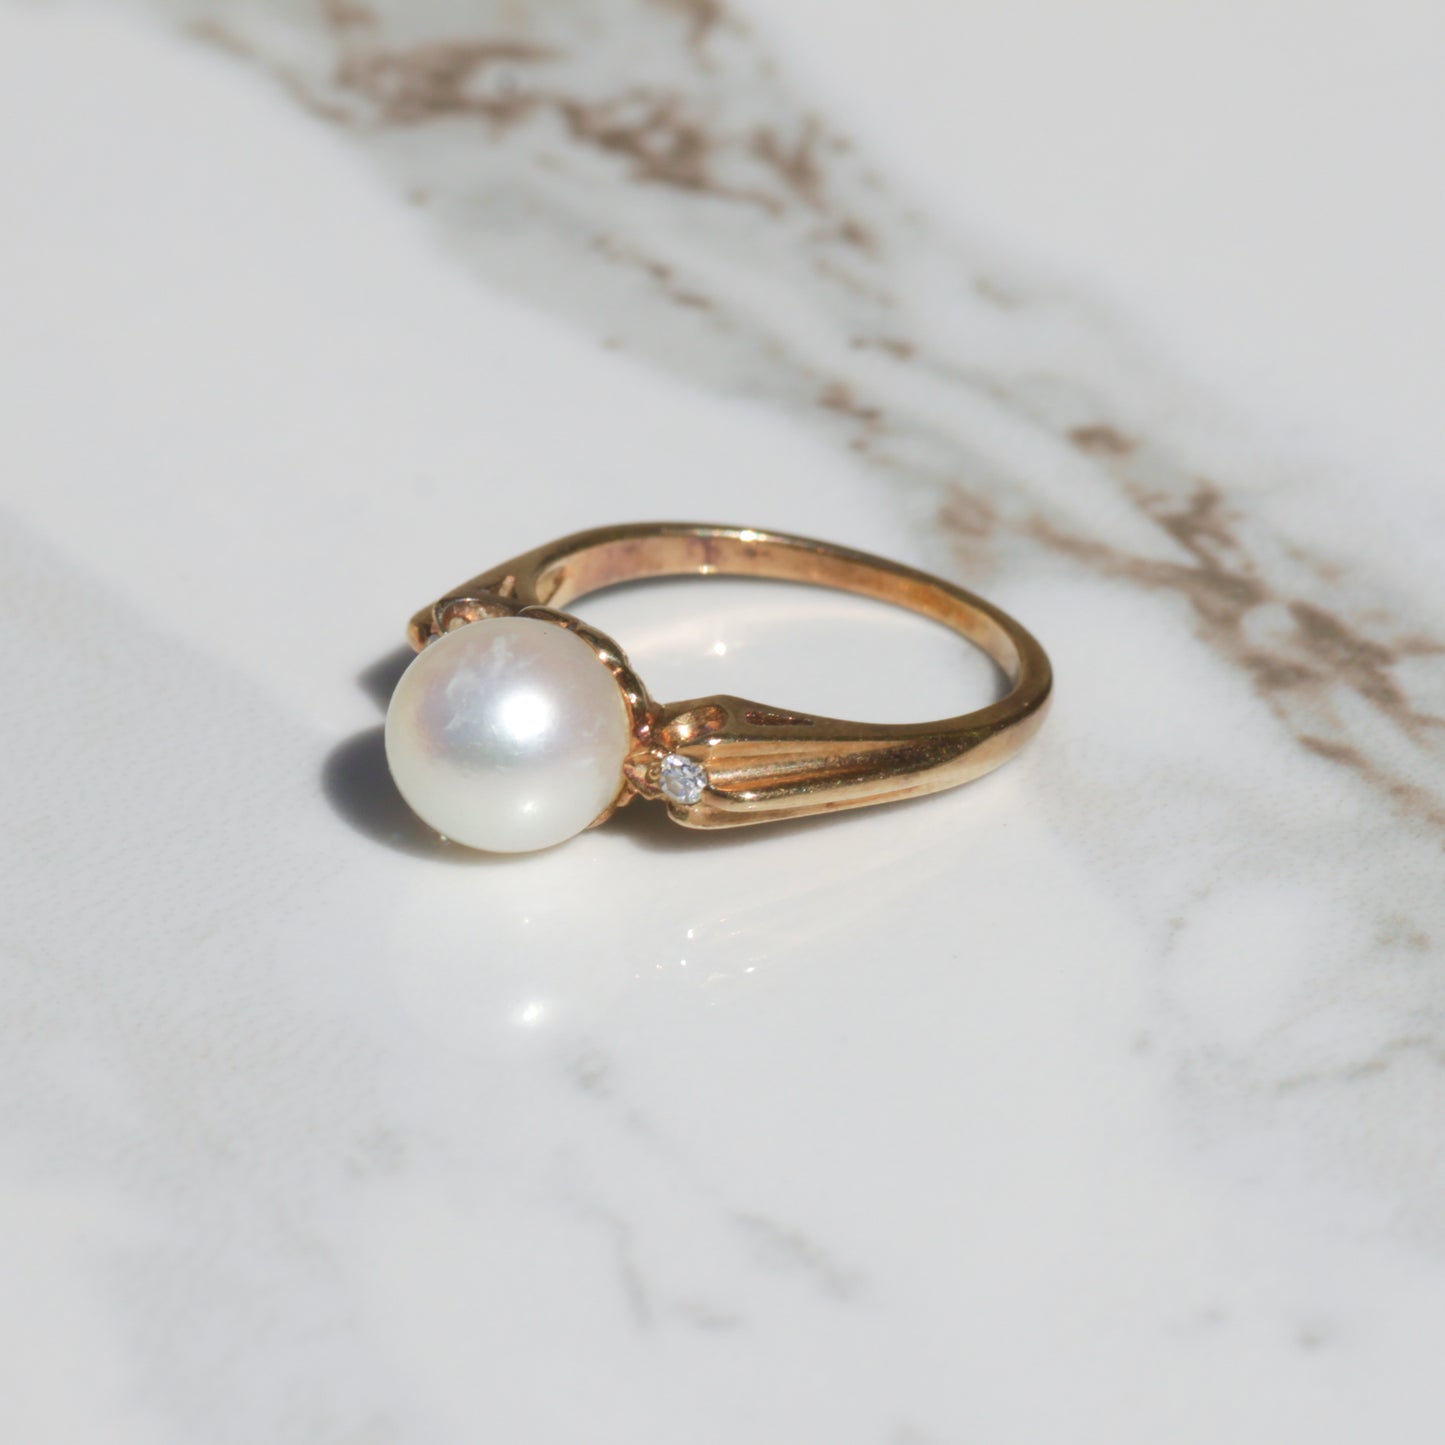 Vintage Pearl and Diamond Ring 14k Gold Sz 4 1/2